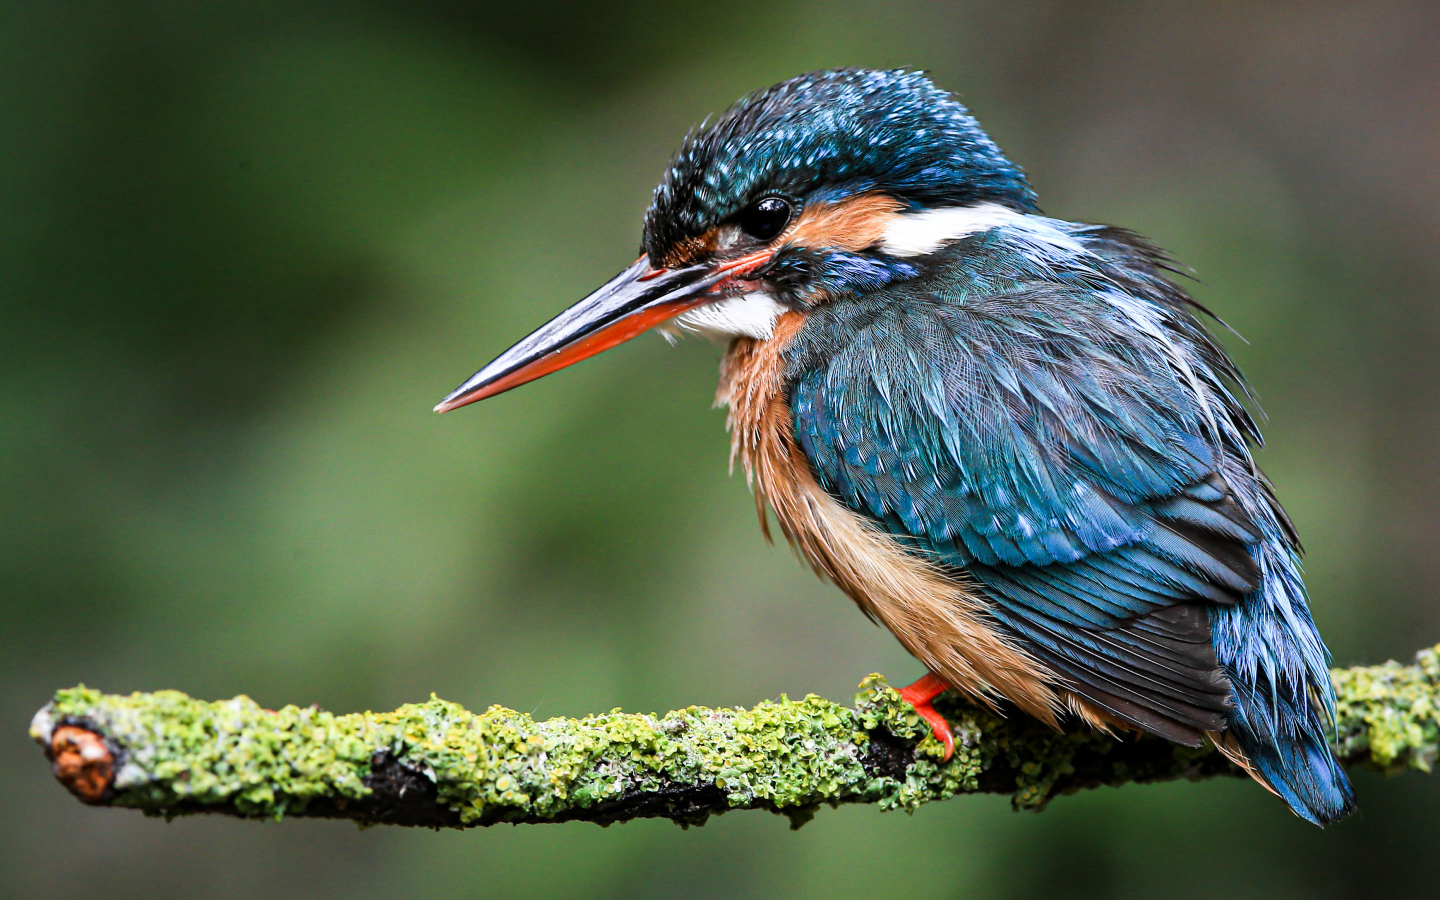 Little kingfisher sitting on a moss-covered branch